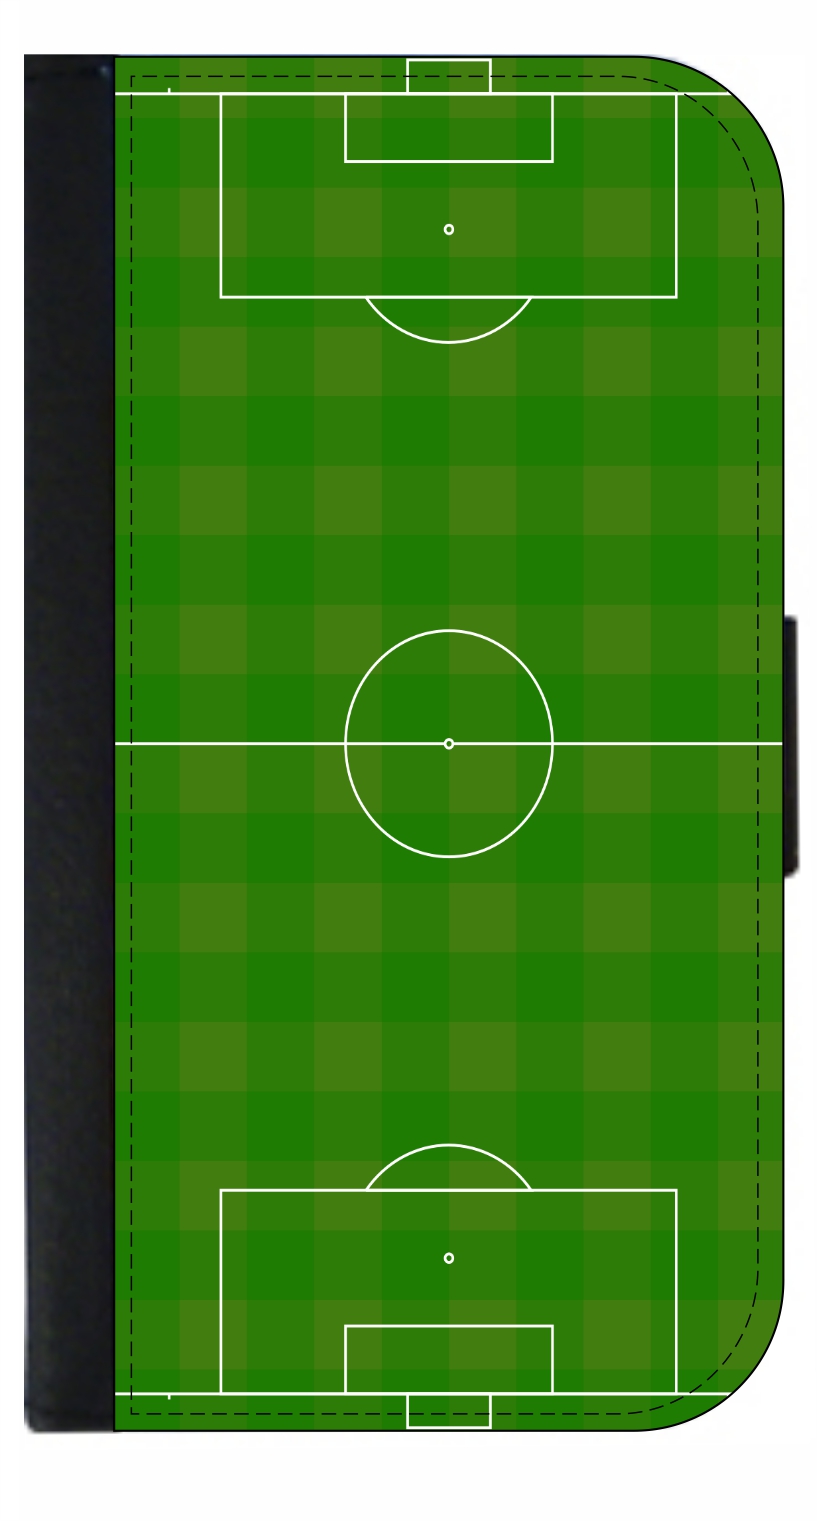 Soccer Court - Galaxy s10 Case Black - Galaxy s10 Case Leather Impression - s10 Wallet Case - s10 Case Card Holder - image 1 of 3